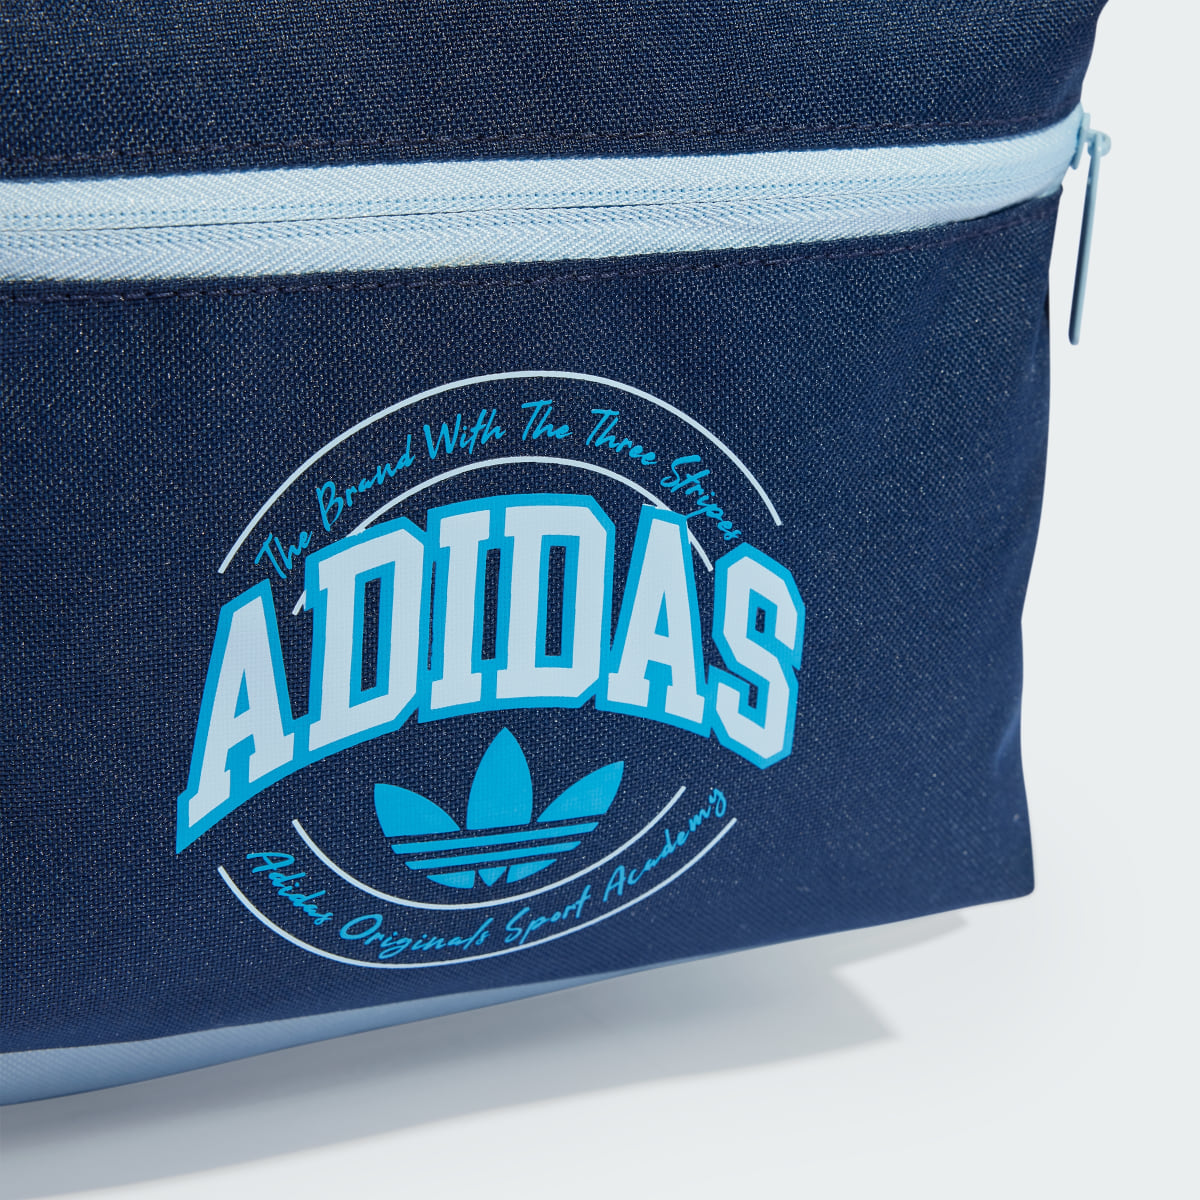 Adidas Collegiate Youth Backpack. 5